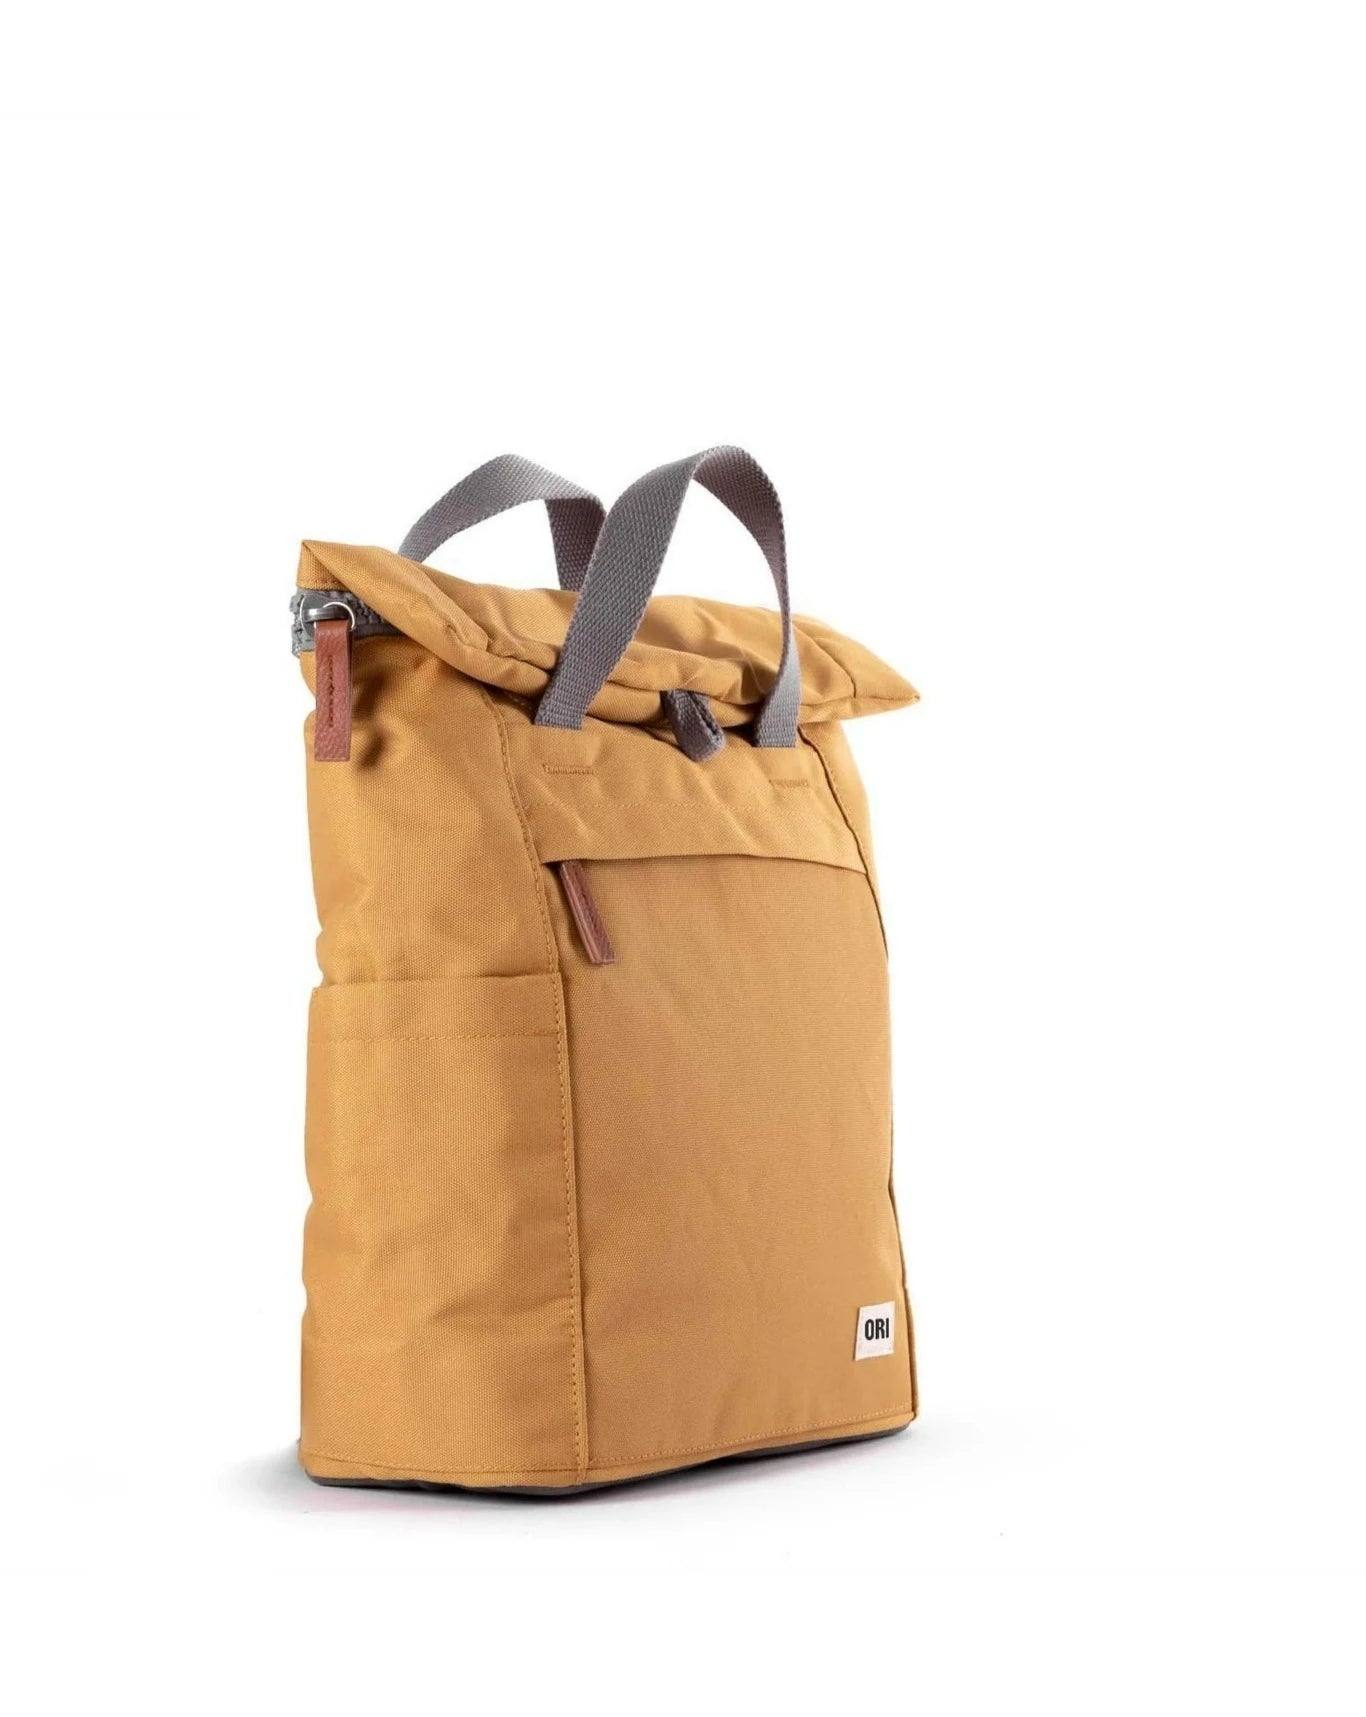 flax finchley backpack